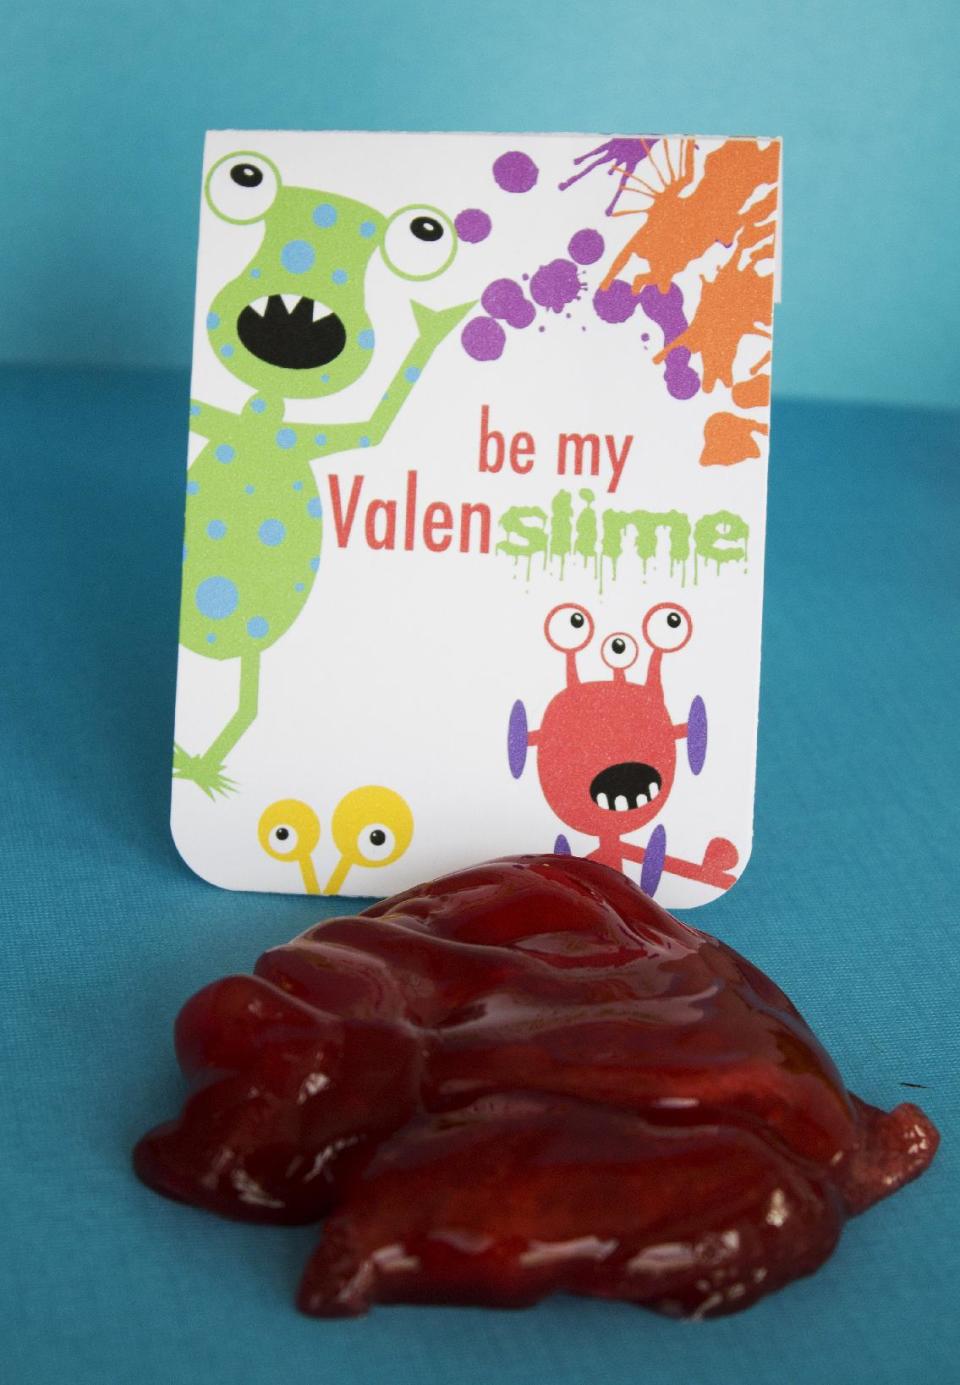 This Jan. 17, 2013 photo shows a handmade Valentine's Day card appropriate for those who find the usual hearts and flowers too lovey-dovey, in Concord, N.H. Made with just two ingredients, Metamucil and water, this homemade "slime" is a fun, non-toxic alternative to candy. (AP Photo/Holly Ramer)